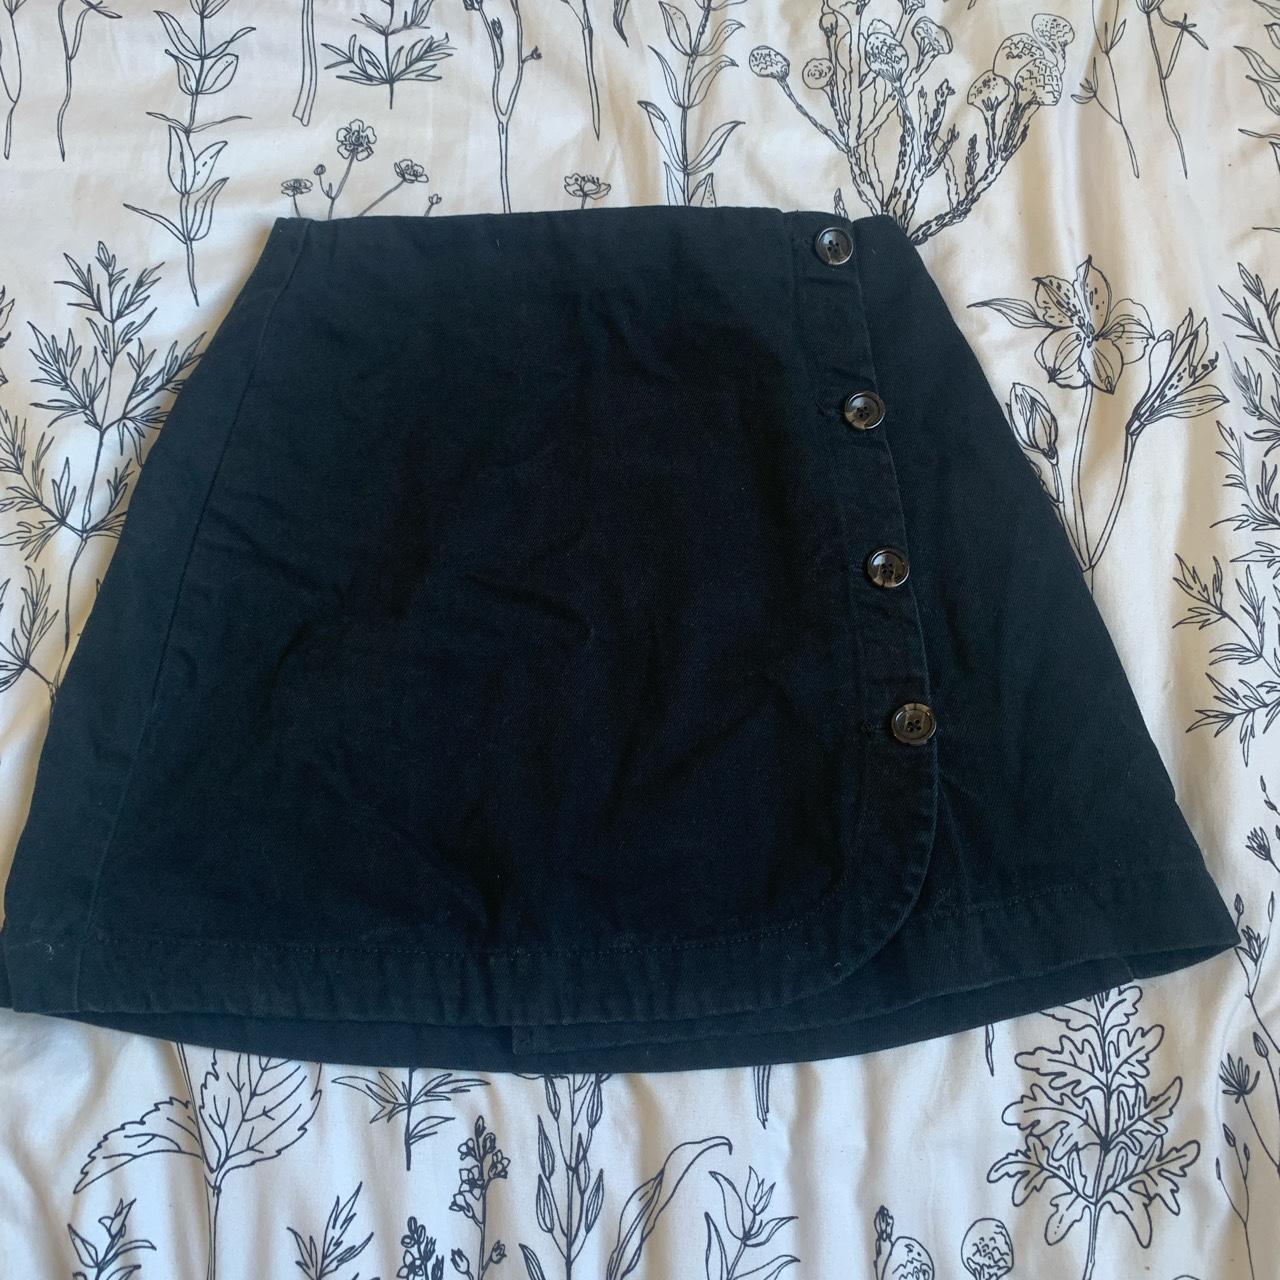 Small black skirt with buttons. Only worn once. - Depop